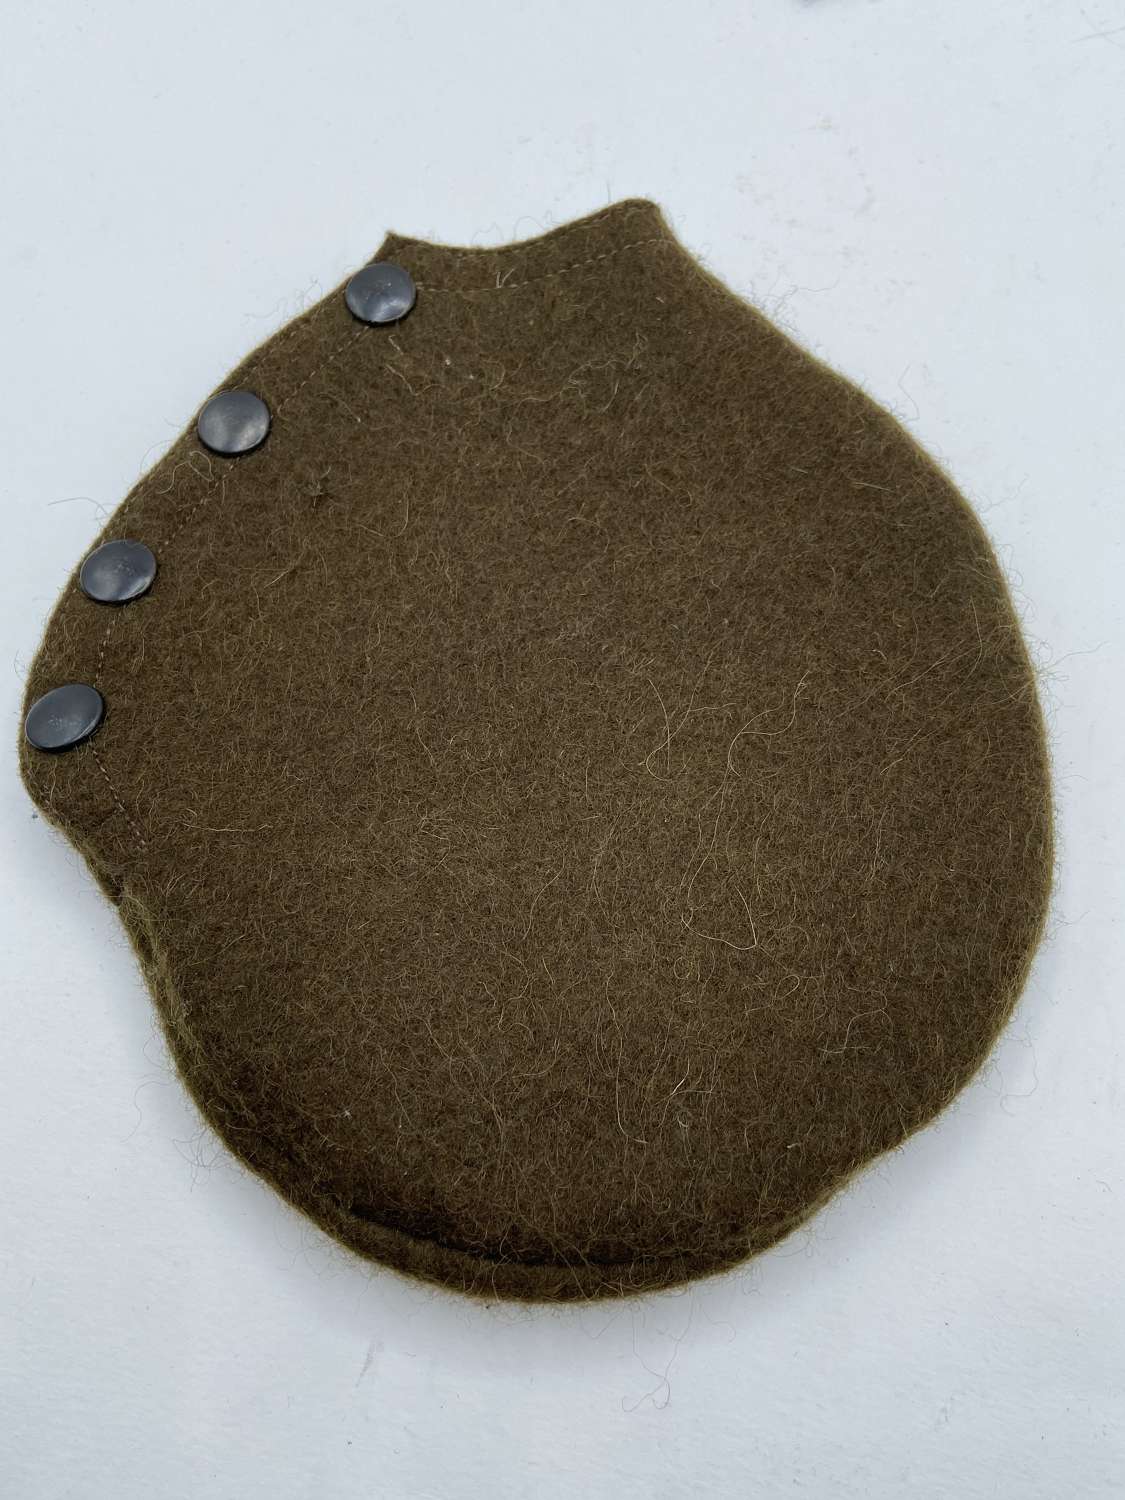 German Army Bundeswehr Gourd Flask Olive Green Un-Issued Felt Cover